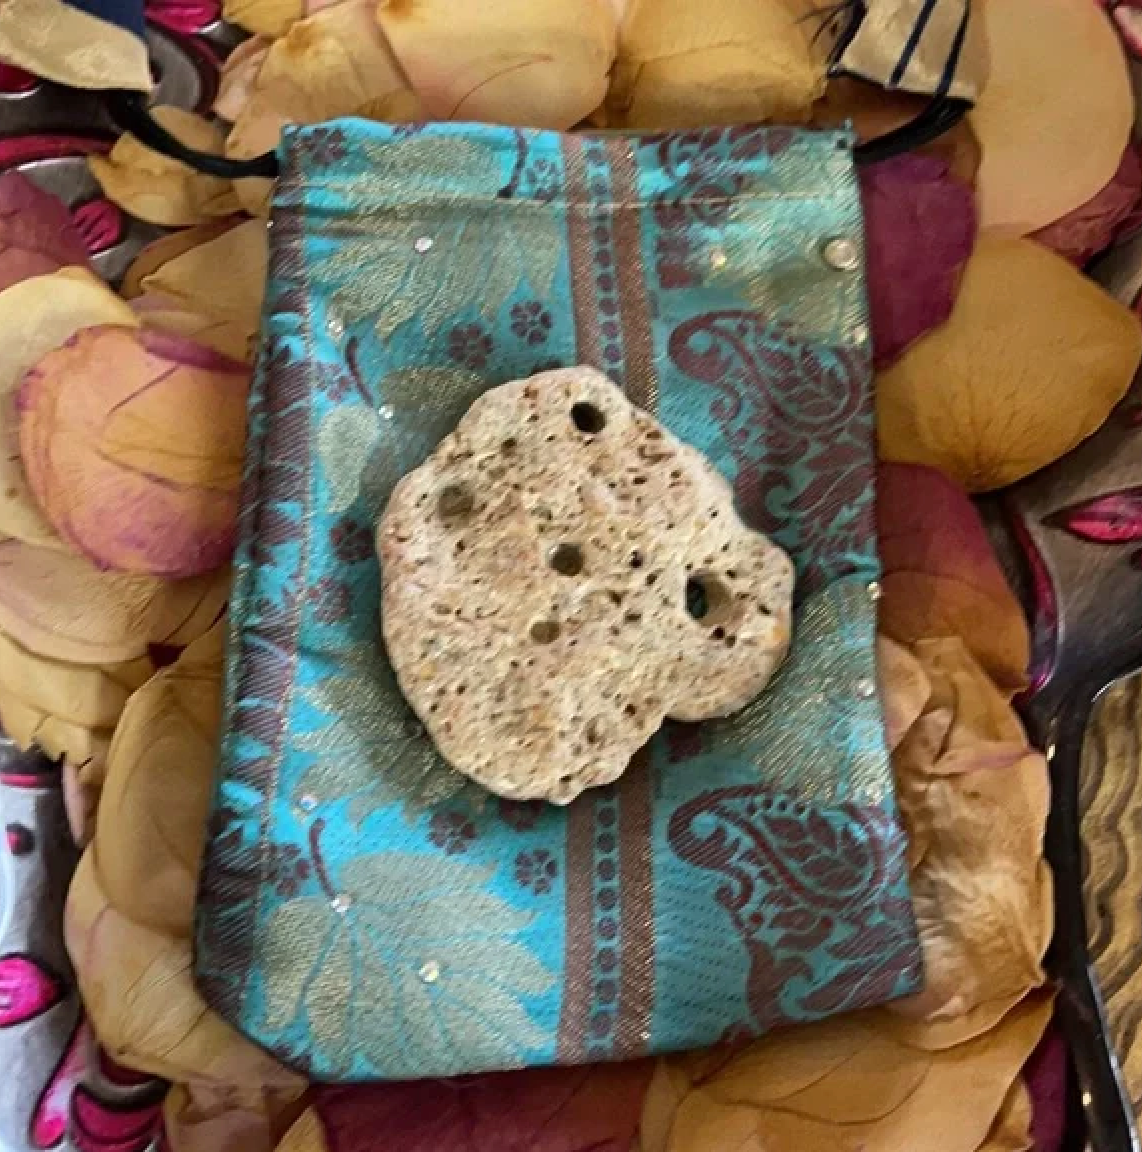 Colossal Hag Stone with Gift Pouch, Good Fortune Water Amulet, Bodhi Crystal Magic